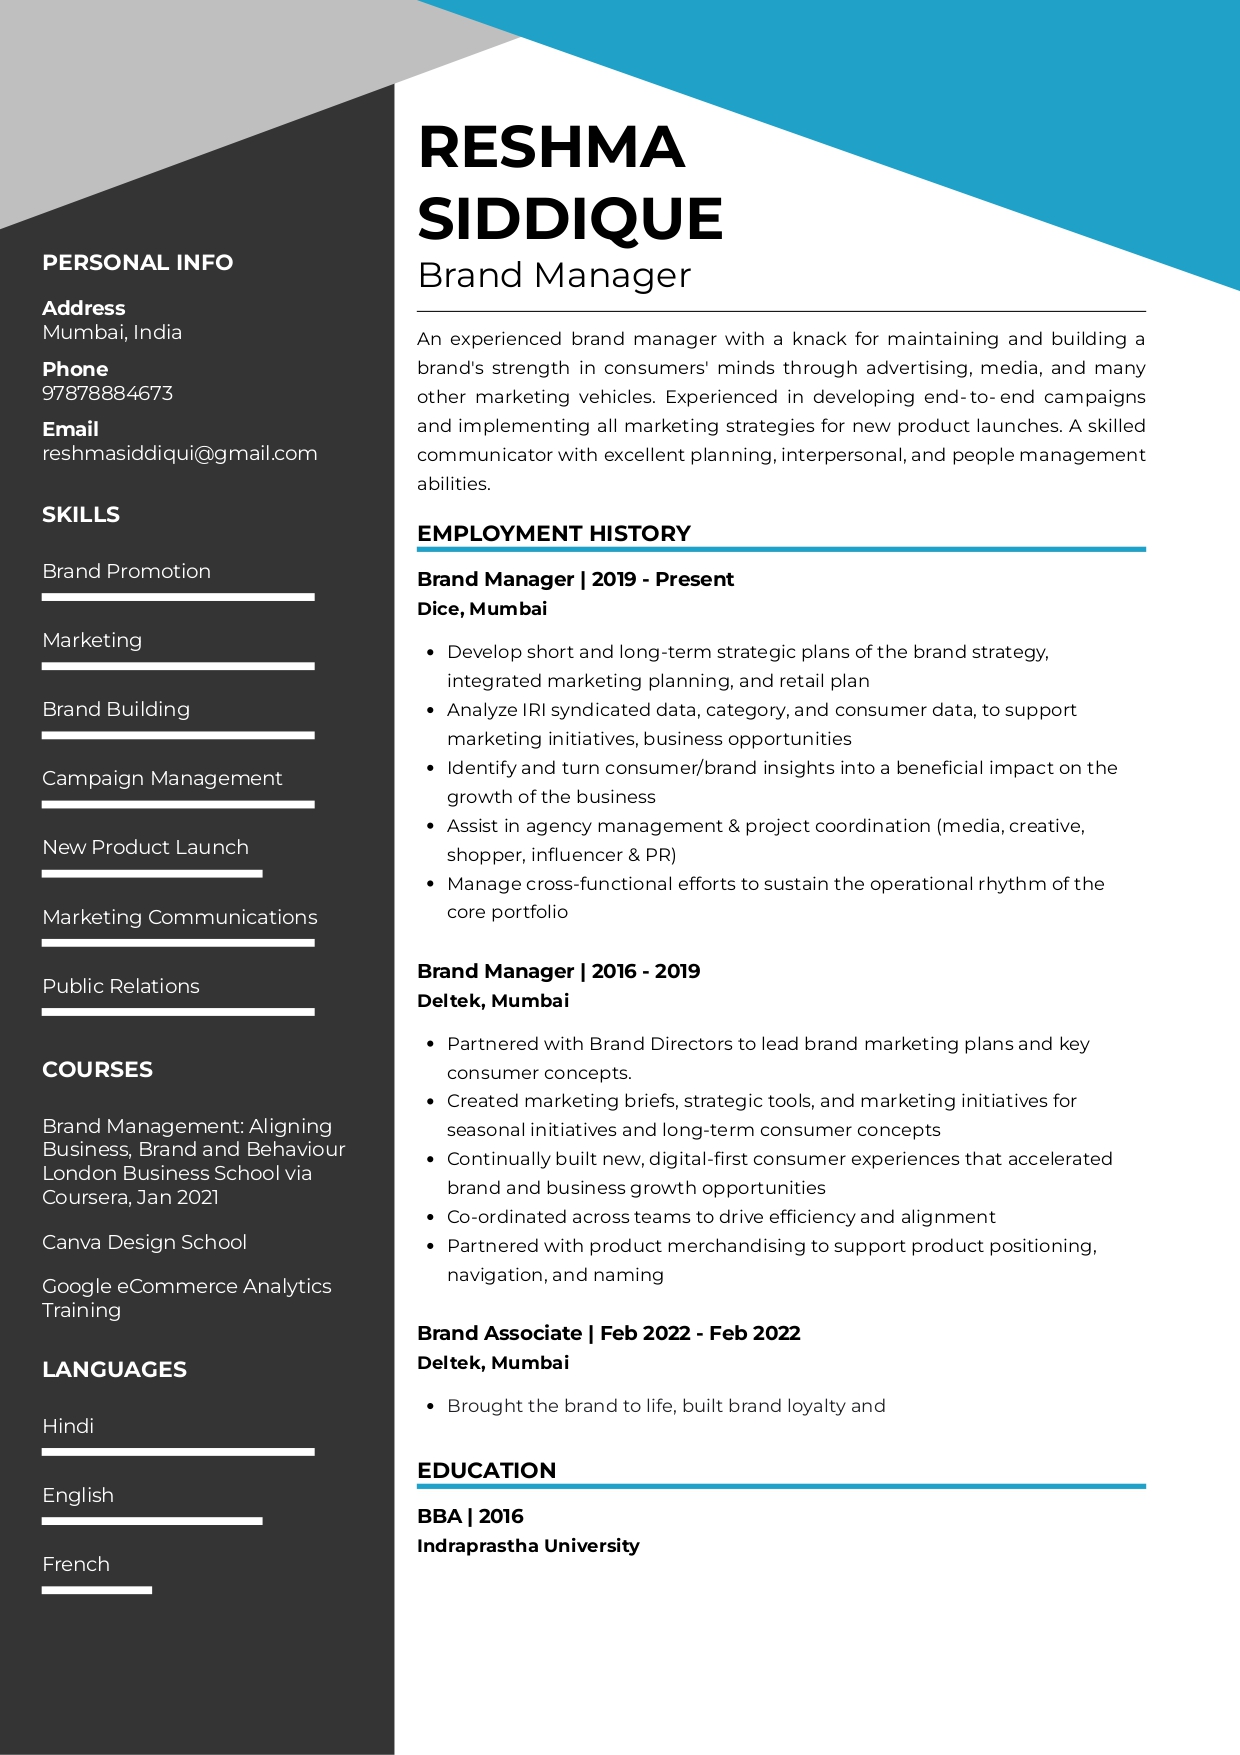 Resume of Brand Manager